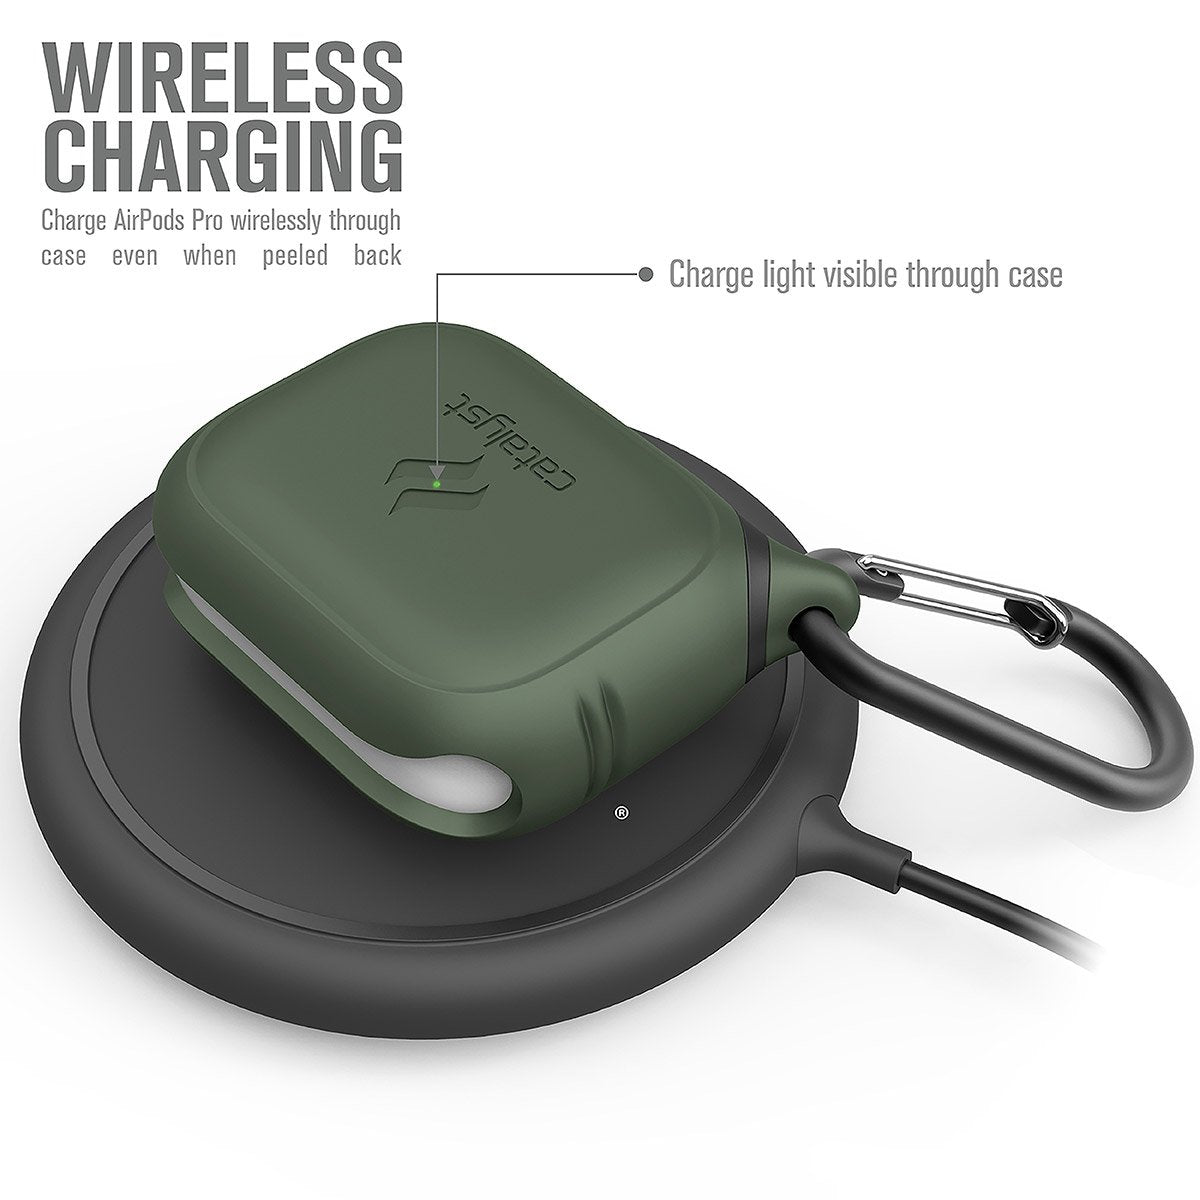 CATAPDPROGRN | catalyst airpods pro gen 2 1 waterproof case carabiner army green on top of a wireless charger text reads wireless charging charge airpods pro wirelessly through case even when peeled back charge light visible through case